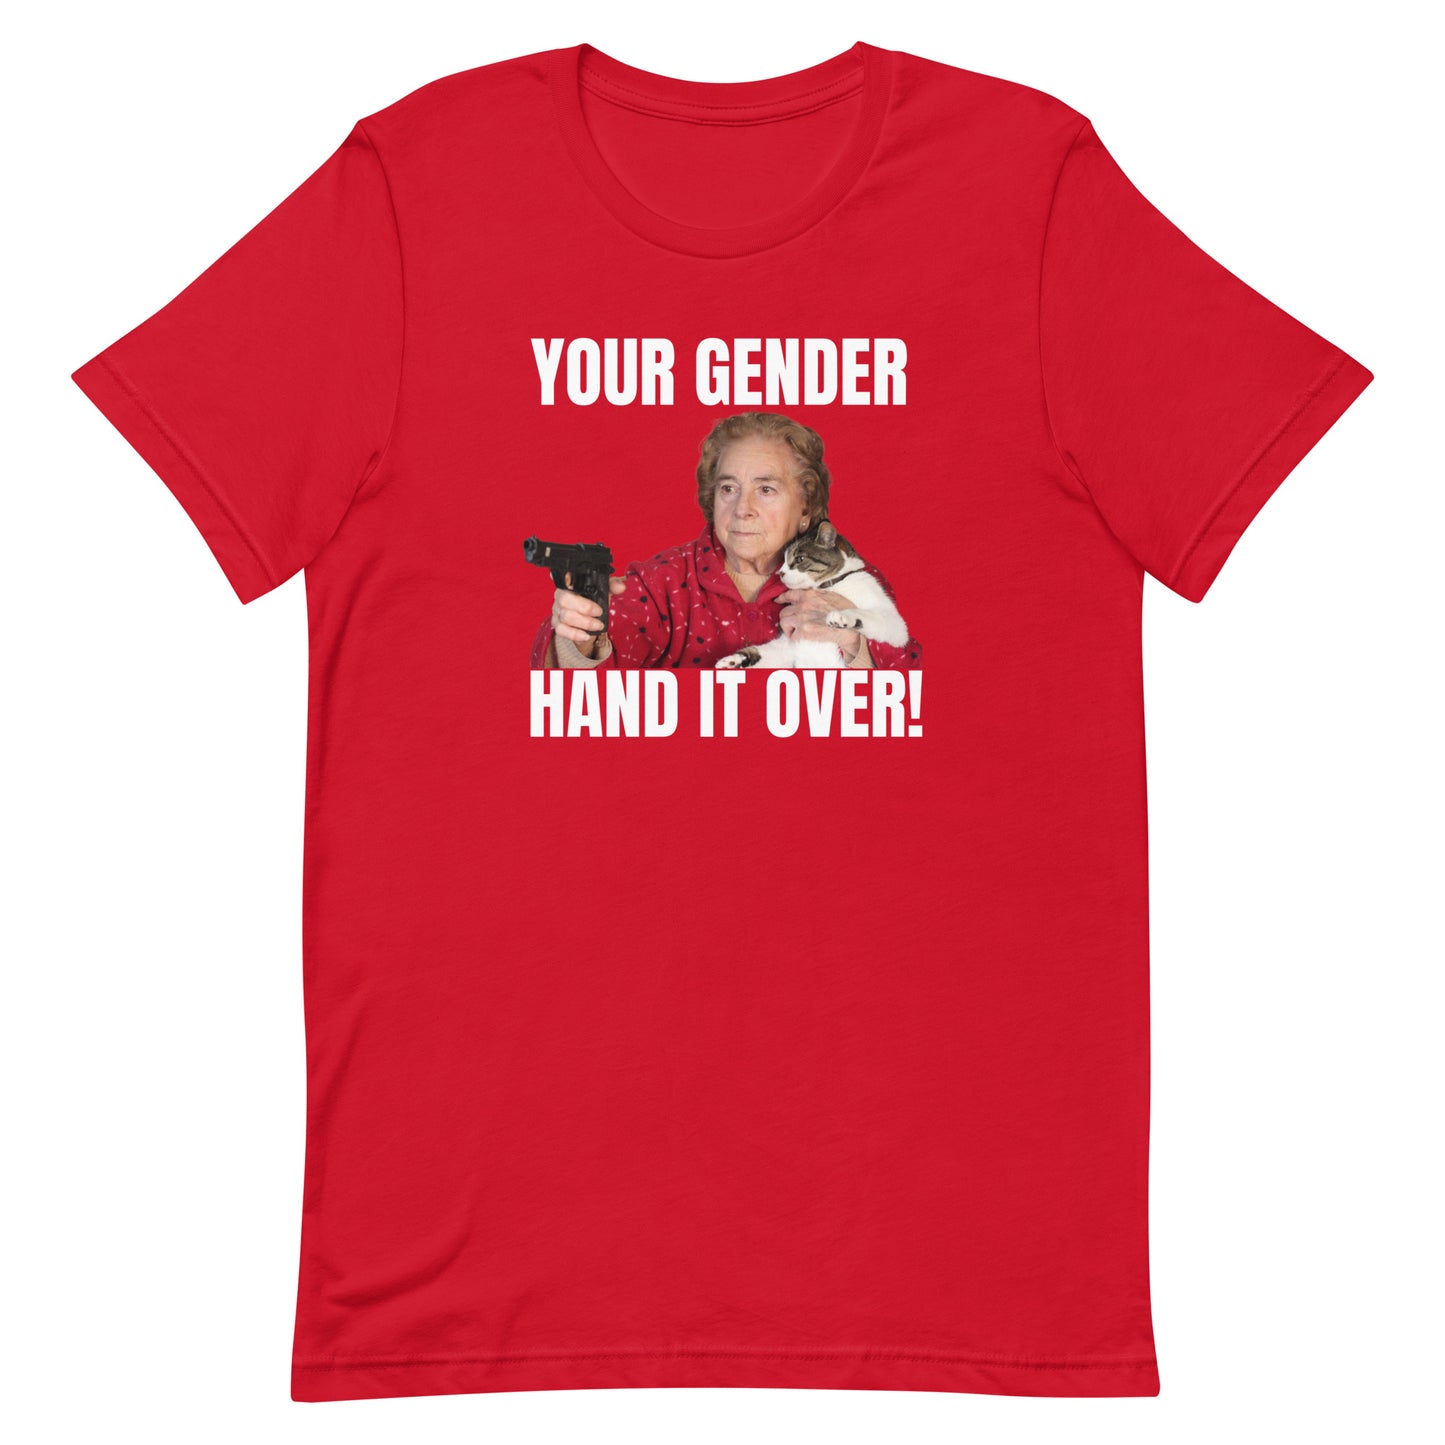 Your Gender Hand it Over Unisex t-shirt